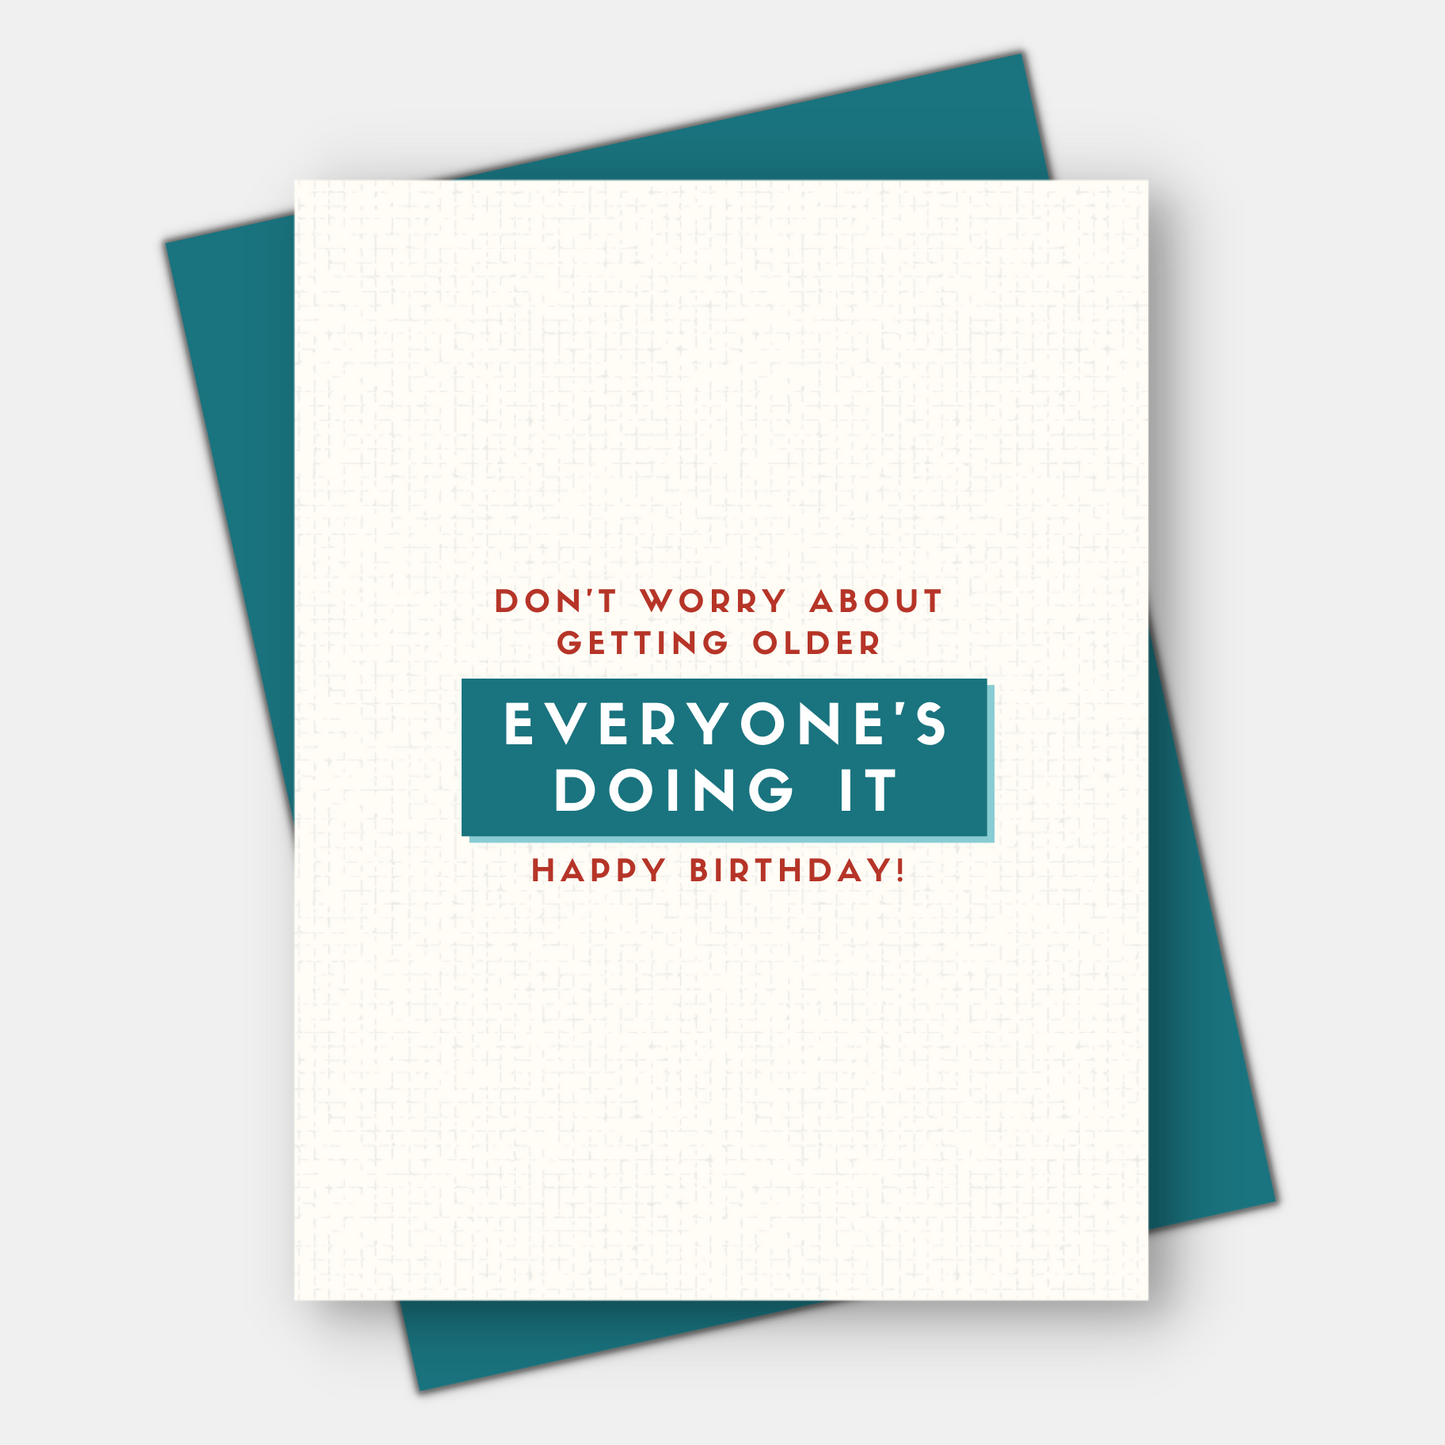 Don't Worry About Getting Older, Age-Positive Birthday Card